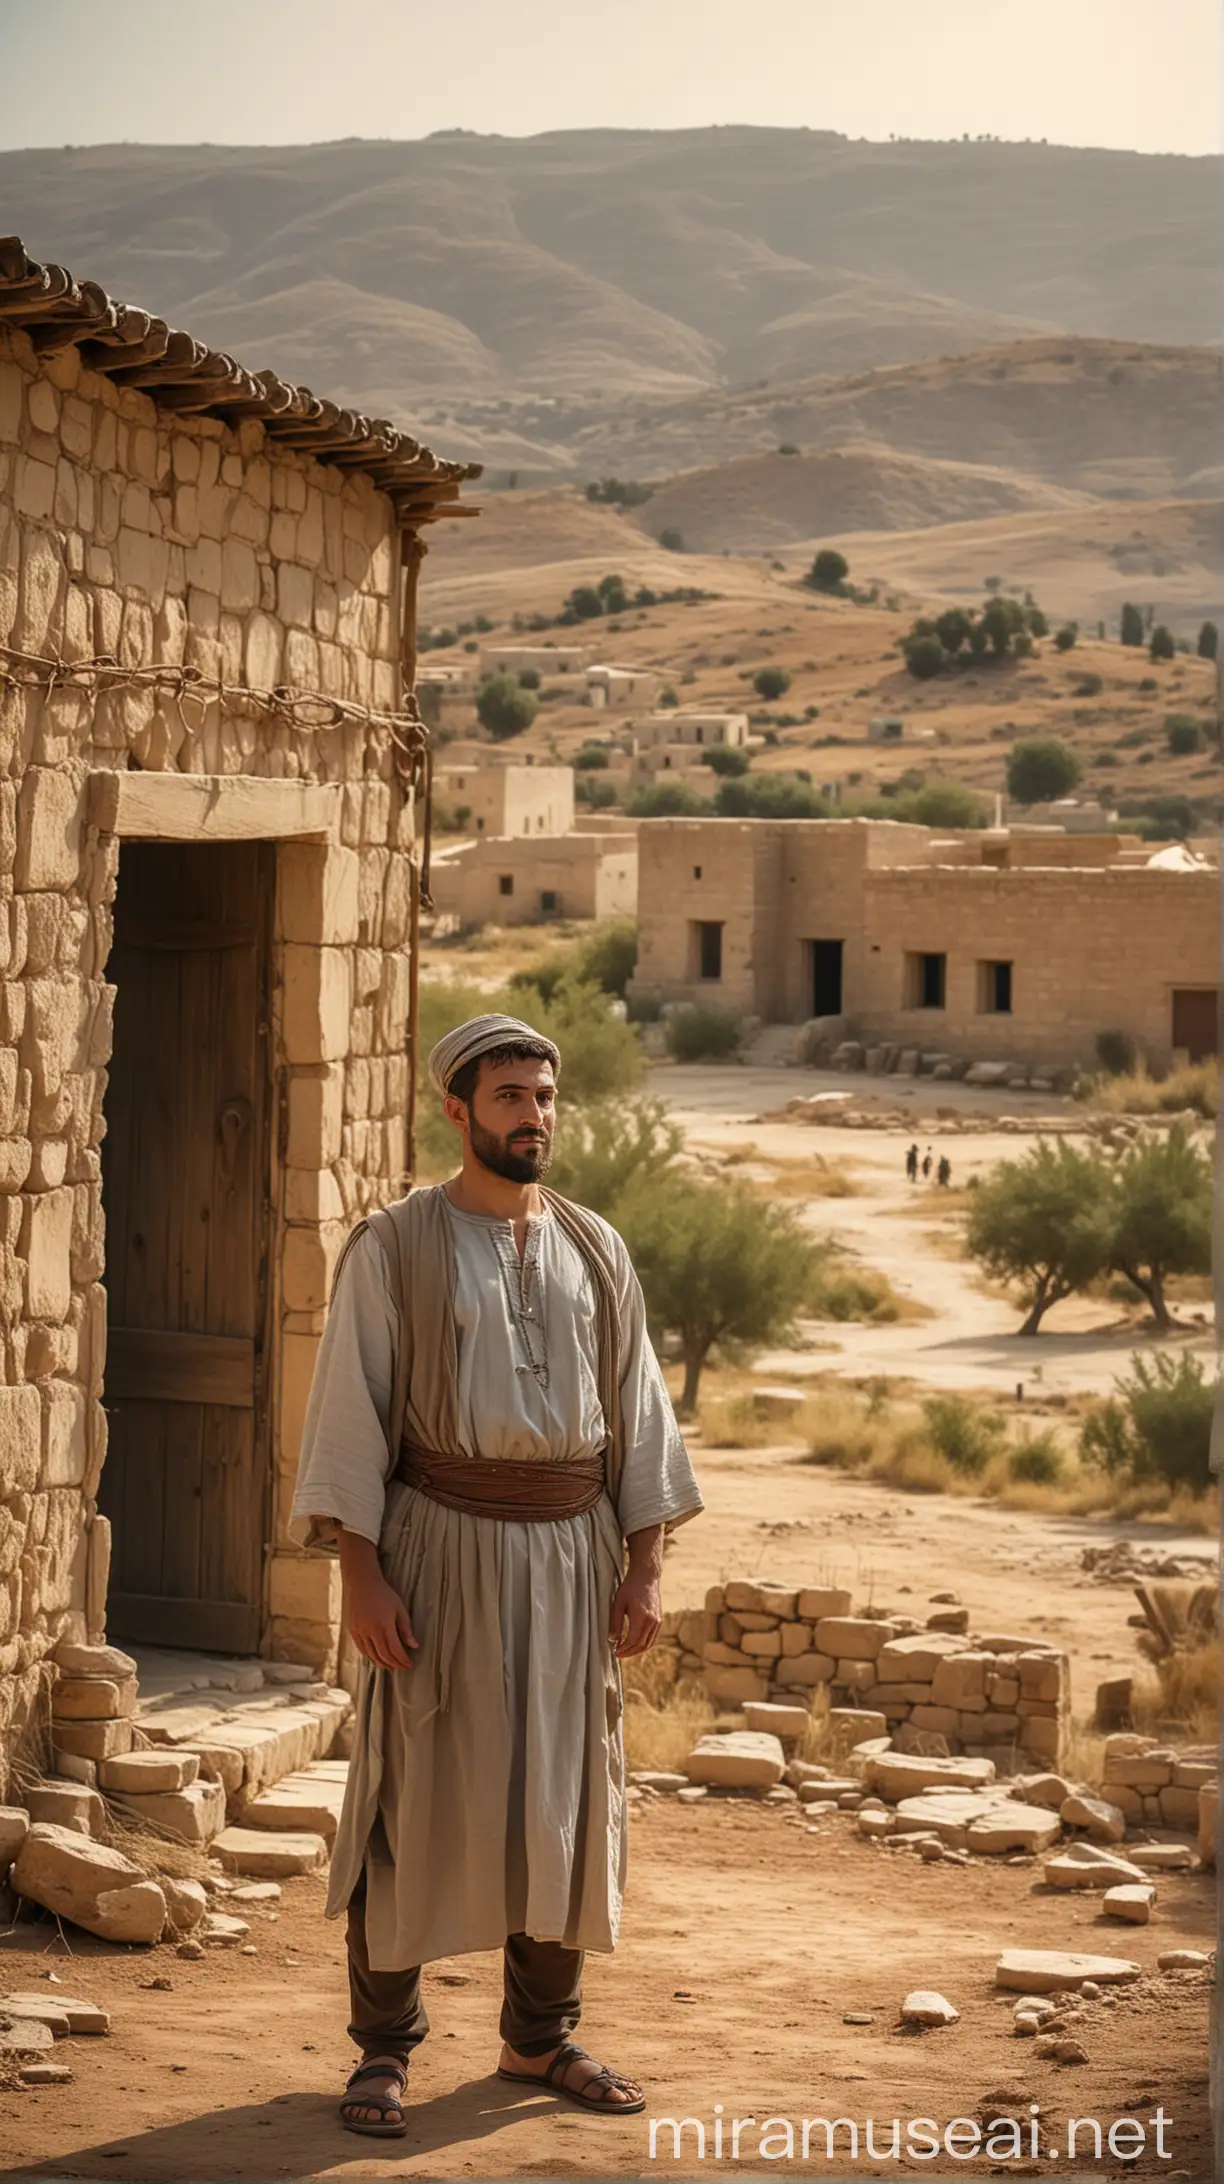 Create an image of Obededom, a man in ancient Hebrew attire, standing in front of a modest home. The background should show a rural landscape typical of the 10th century BC, with simple houses and distant hills."In ancient world 